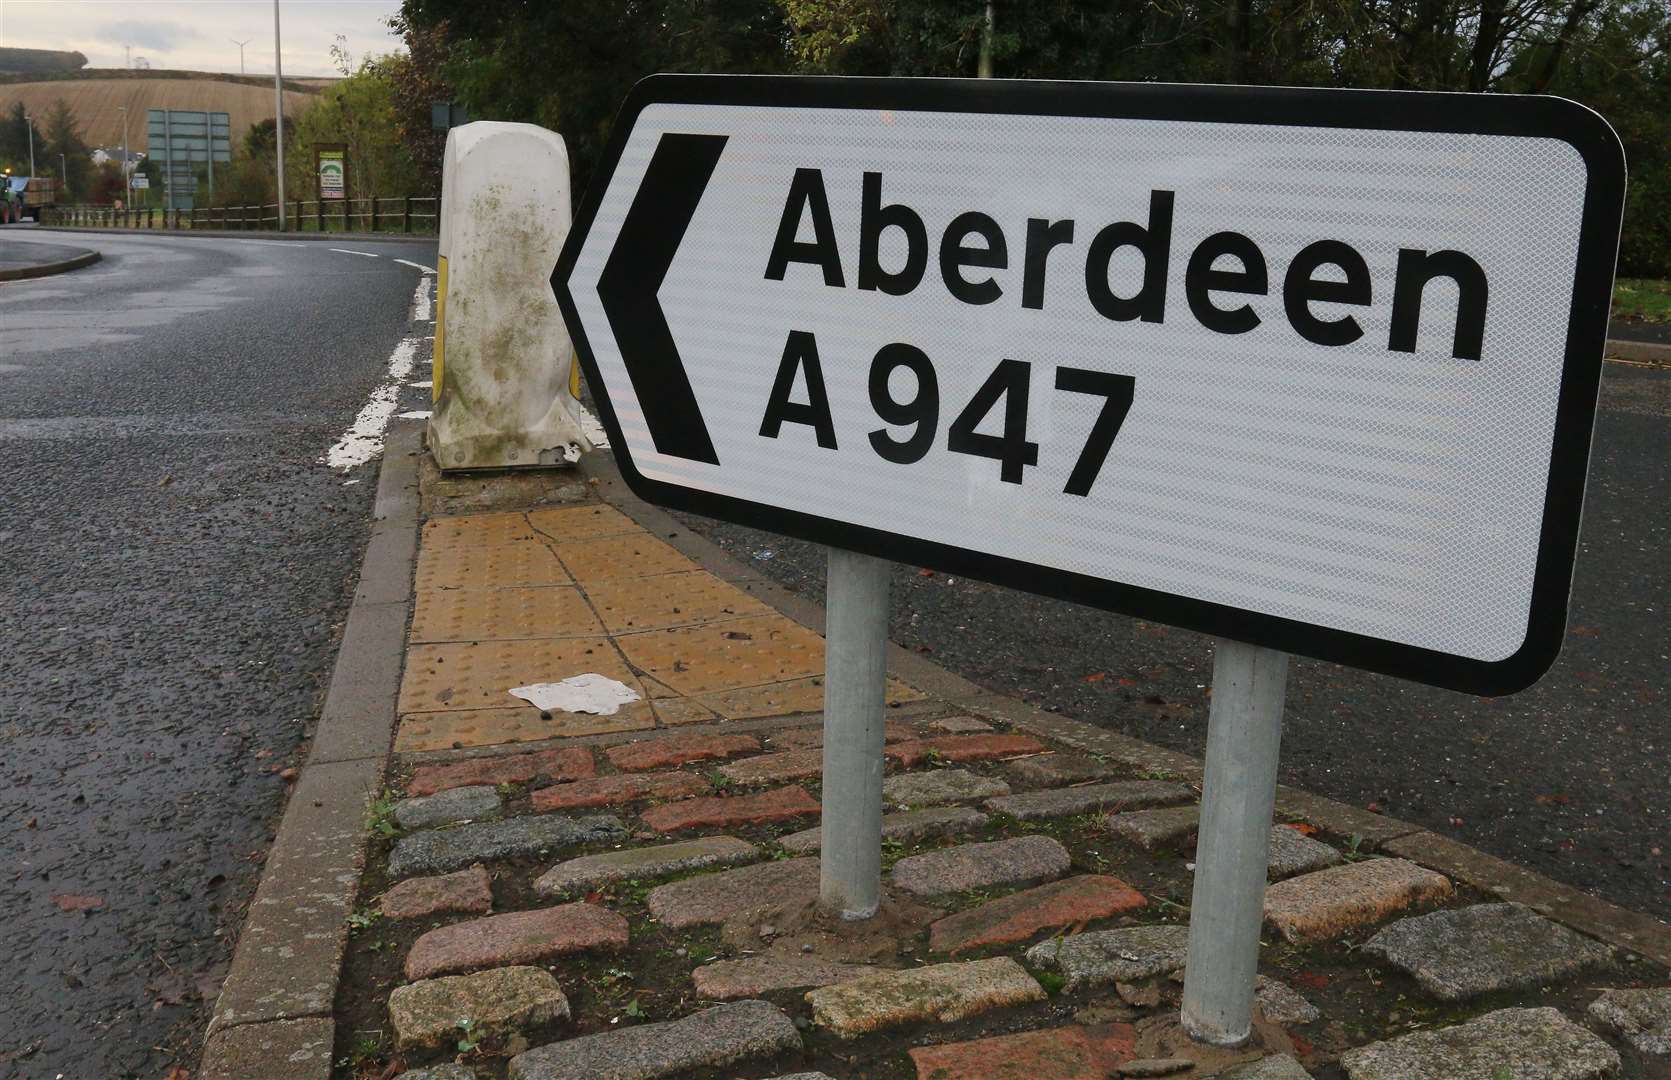 The improvement strategy for the A947 road was examined by councillors